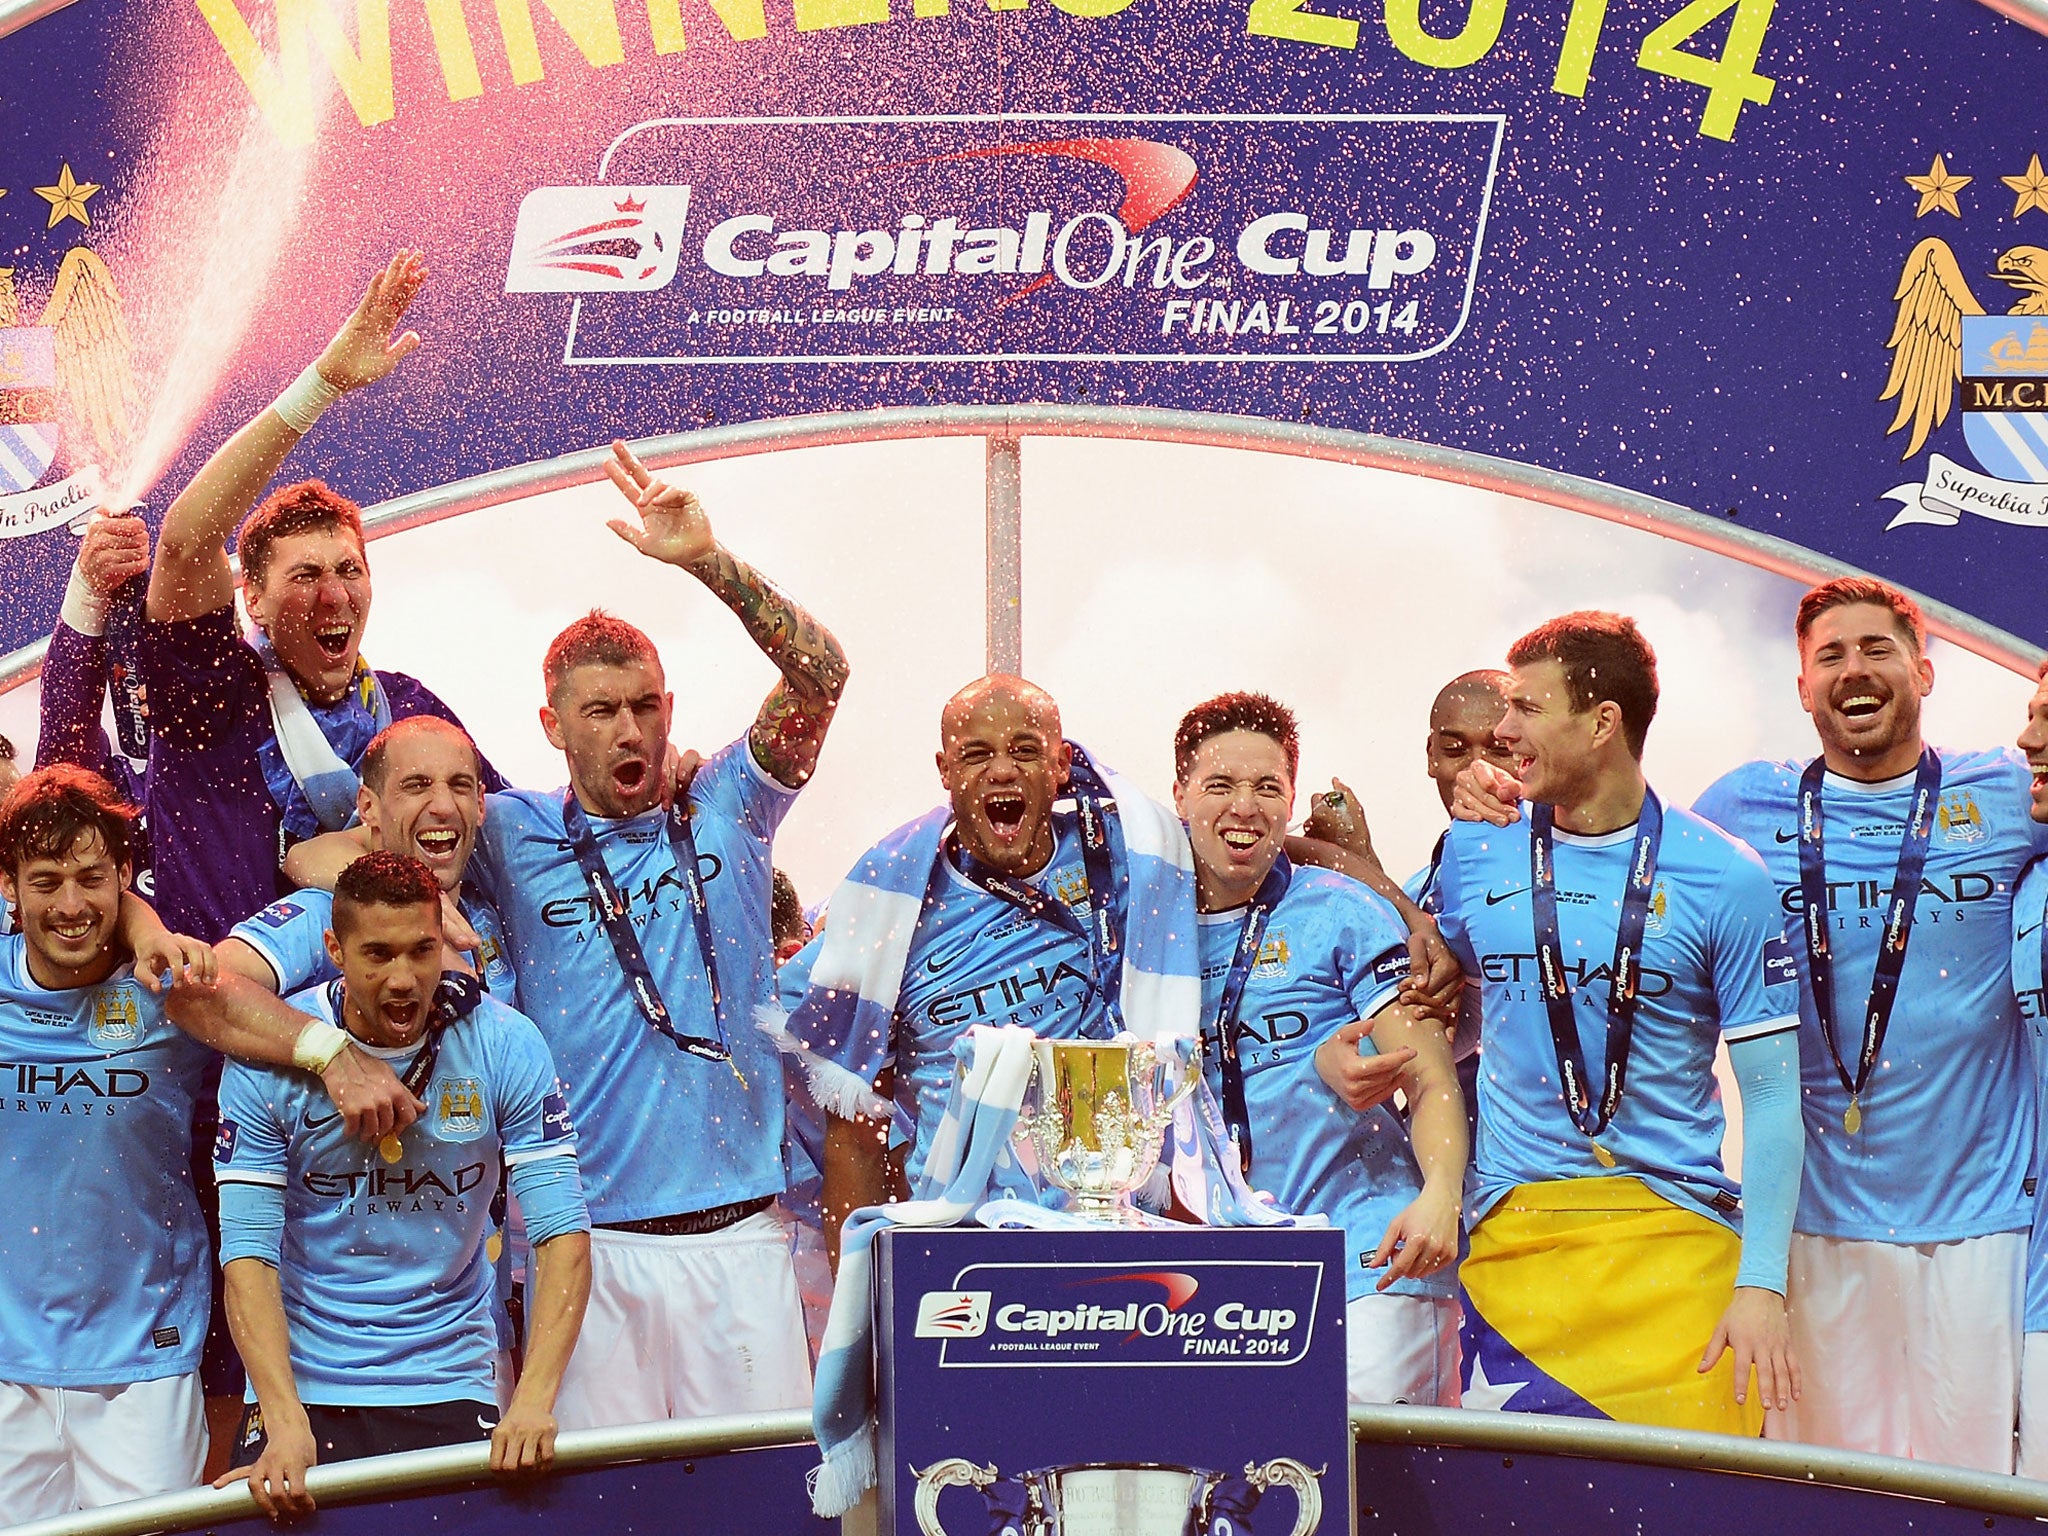 The Manchester City squad celebrate their Capital One Cup triumph